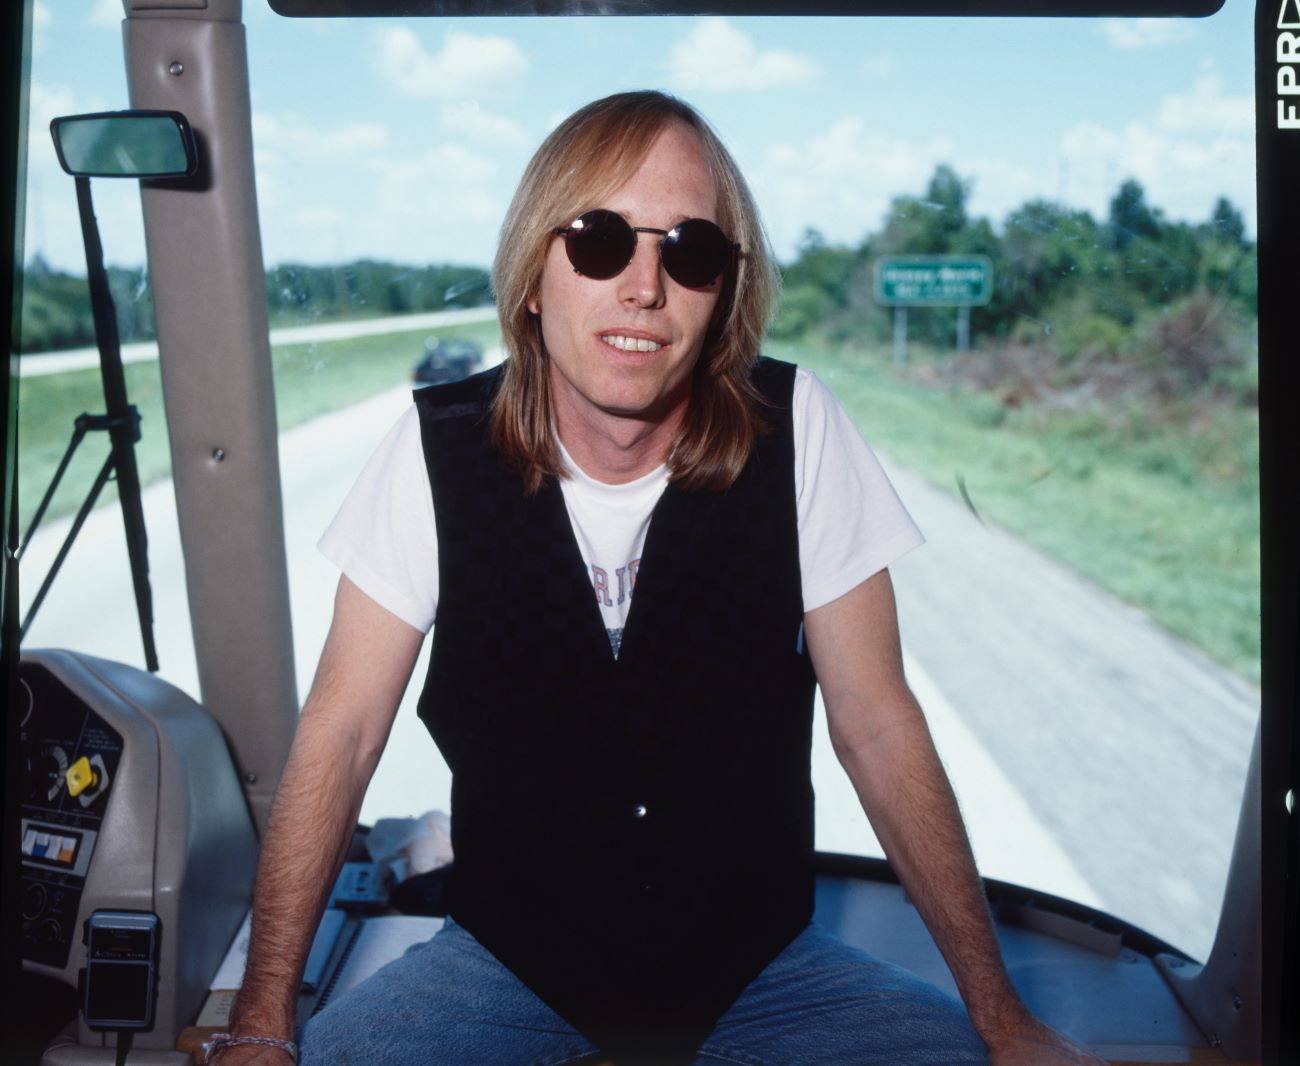 Tom Petty wears a white shirt, vest, and sunglasses in a bus while on tour with the Heartbreakers. Tom Petty formed the Heartbreakers with friends from his hometown.